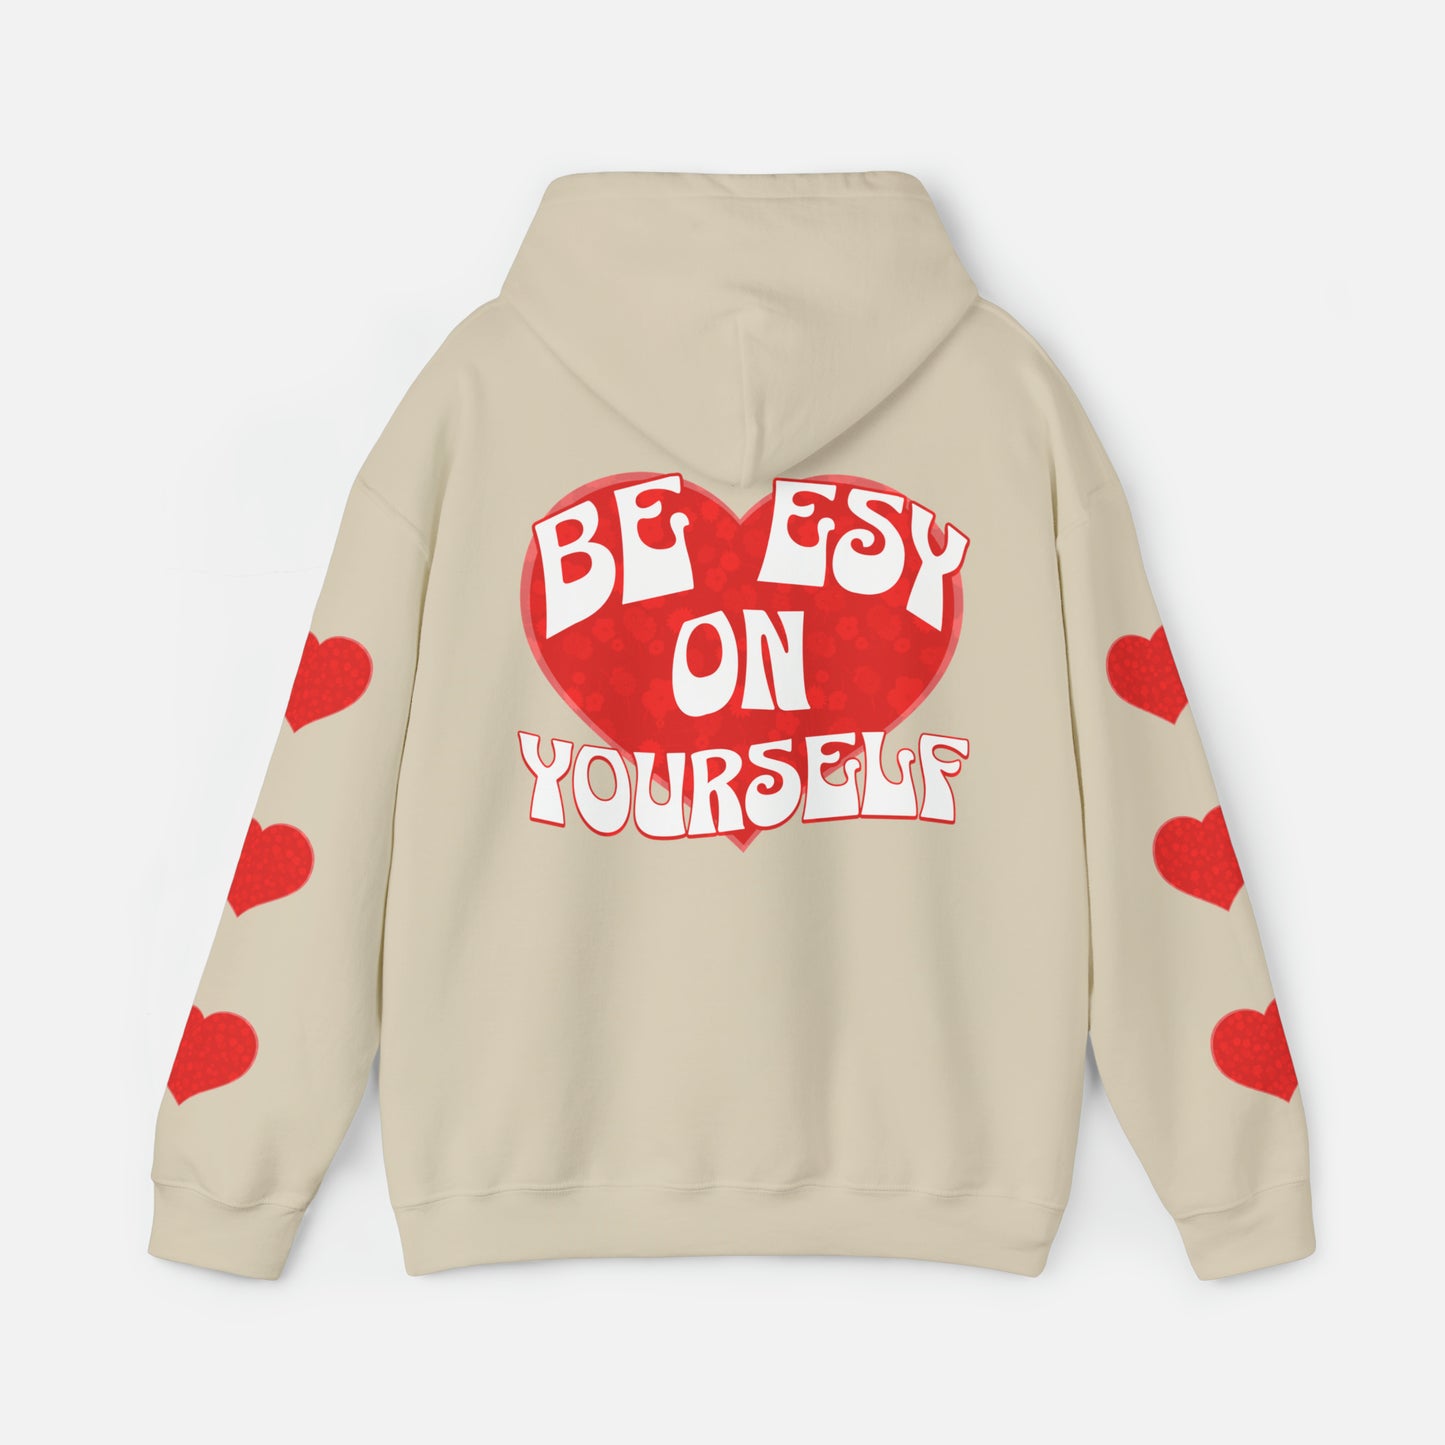 Be Esy On Yourself - Hoodie